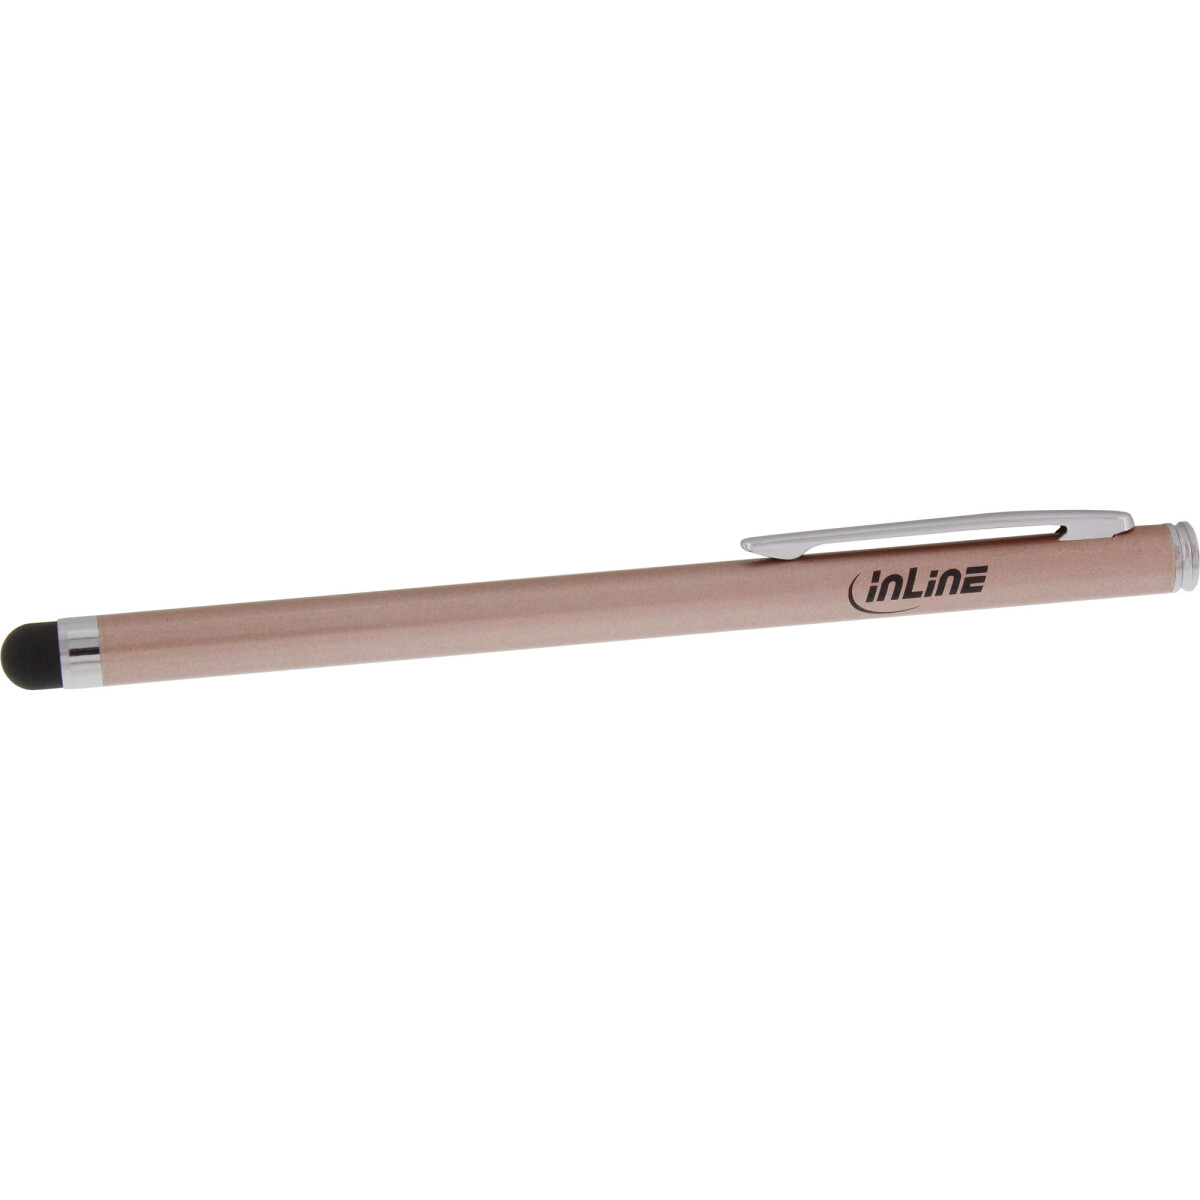 InLine® Stylus, Pen for Touchscreens of Smartphone...